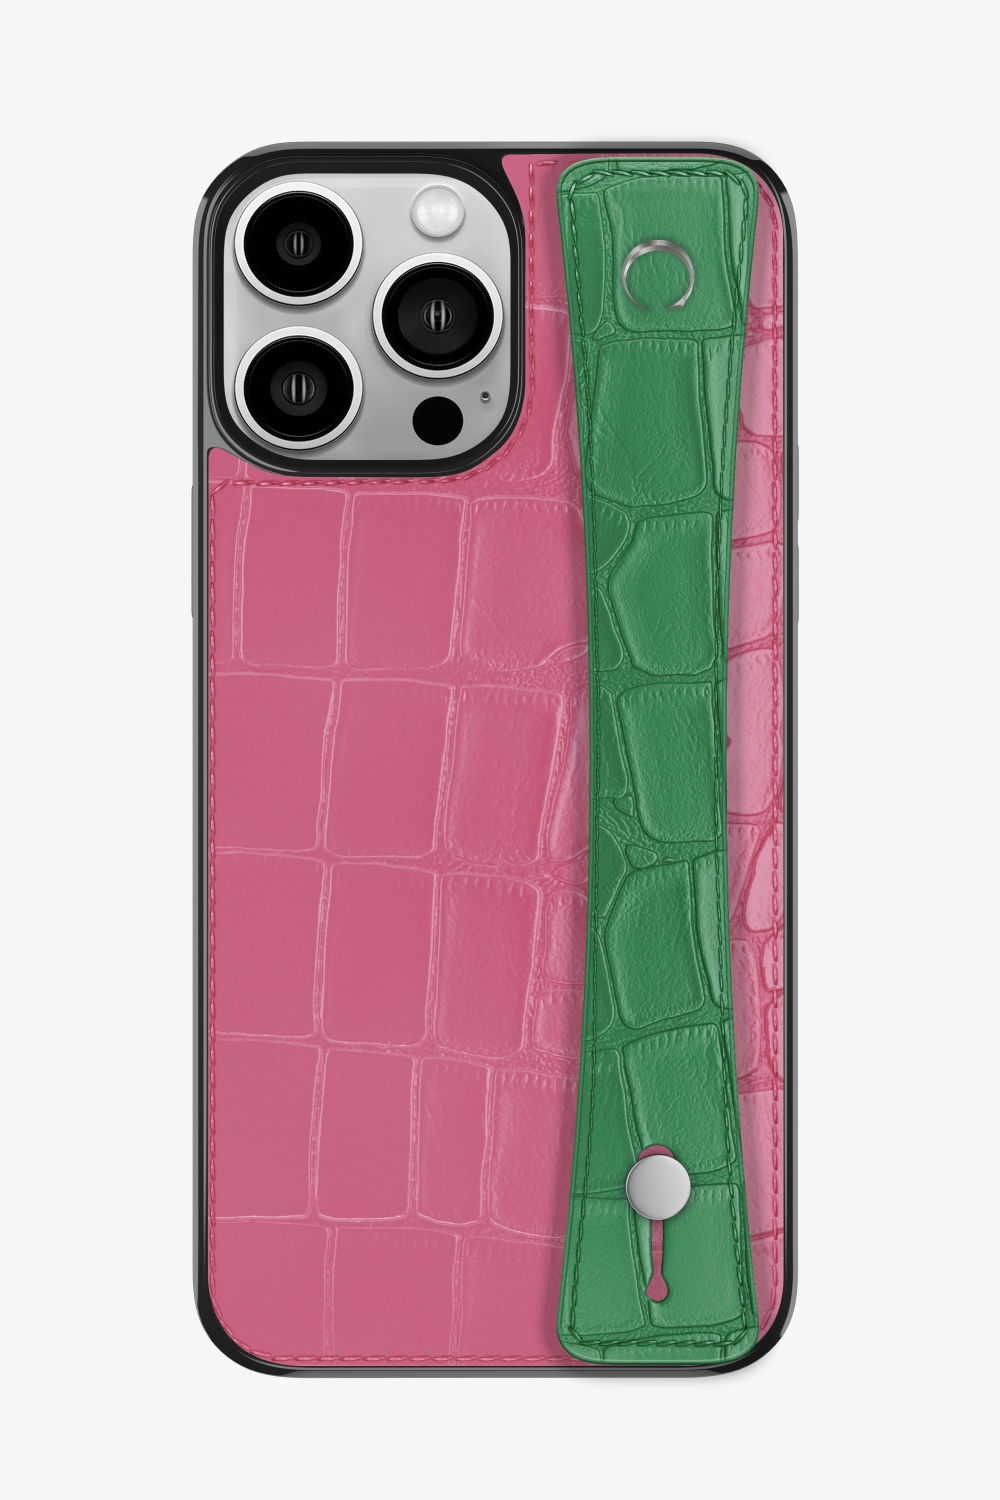 Alligator Sports Strap Case for iPhone 14 Pro Max - Pink / Green Emerald - zollofrance